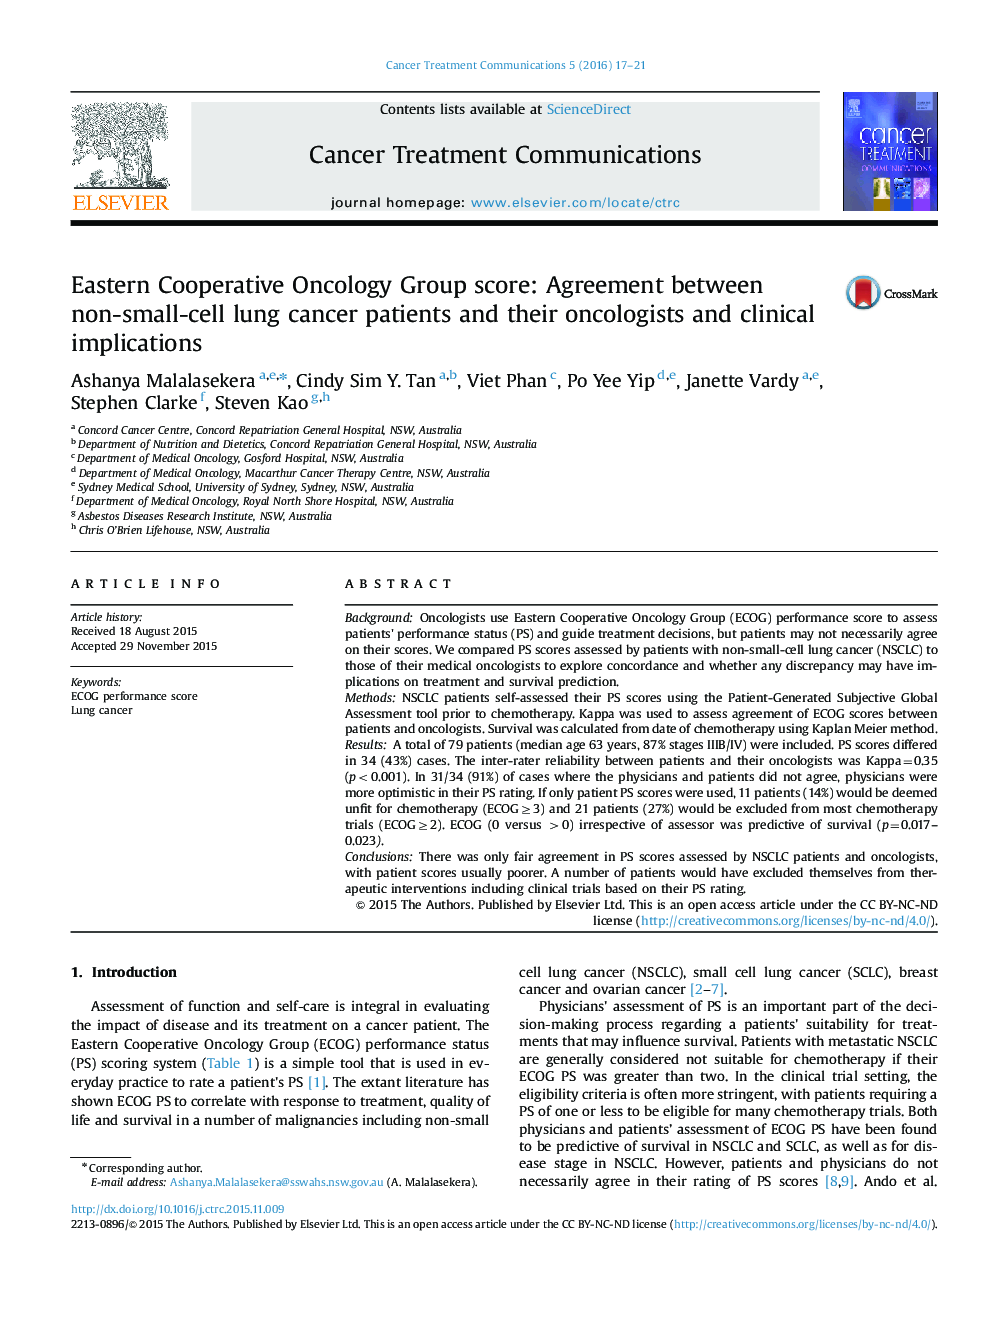 Eastern Cooperative Oncology Group score: Agreement between non-small-cell lung cancer patients and their oncologists and clinical implications